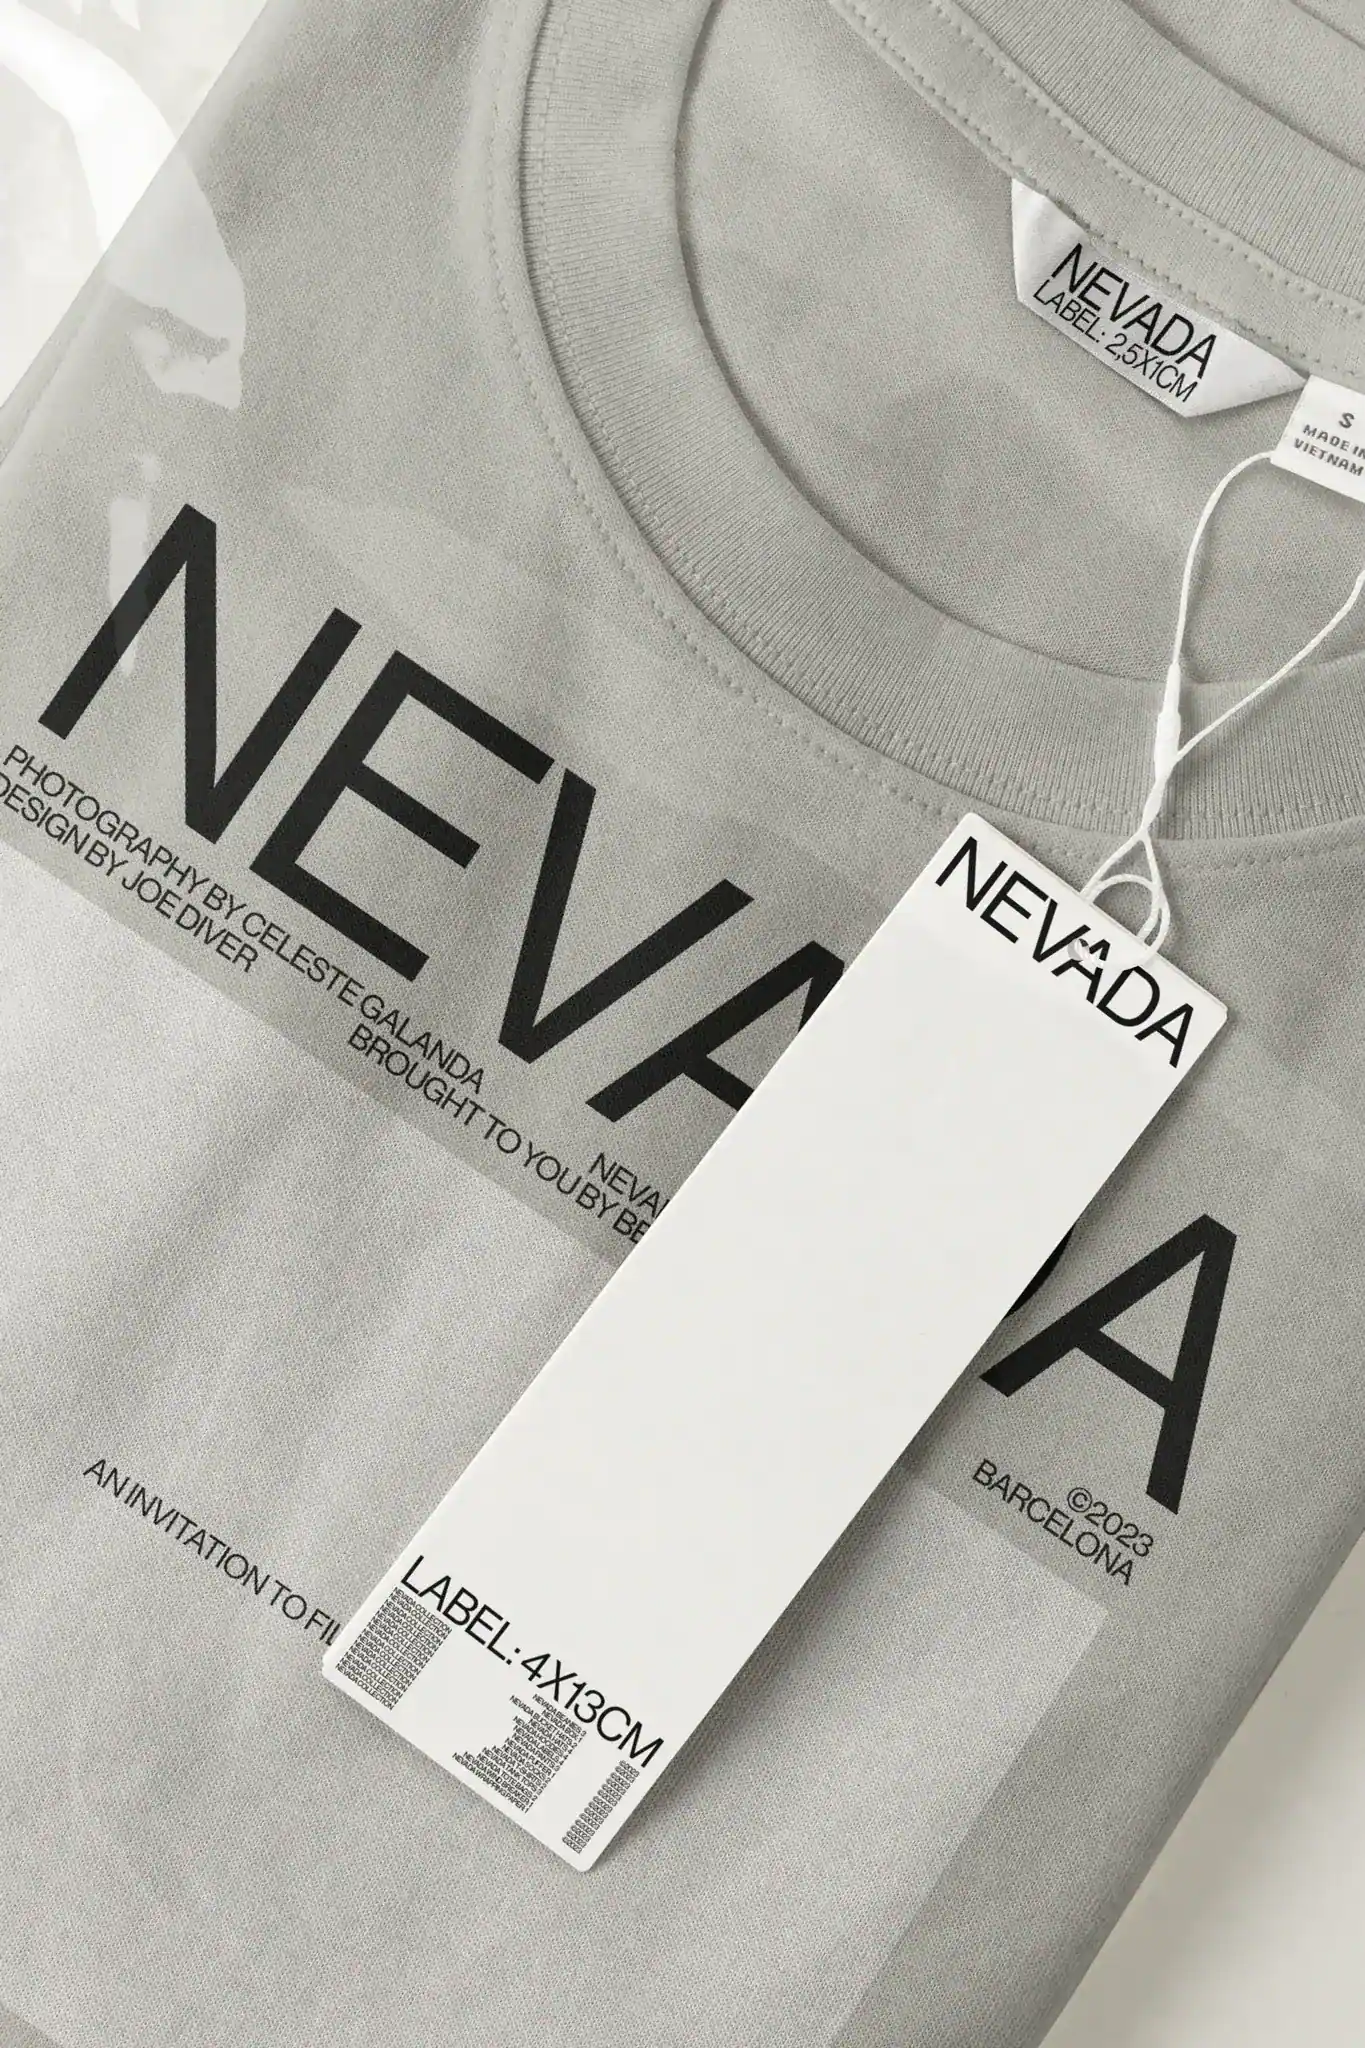 Close-up of a t-shirt mockup with its label mockup, PSD file of a label mockup, t-shirt mockup, apparel mockup, clothing mockup, fashion mockup, high quality mockup, premium quality t-shirt mockup.